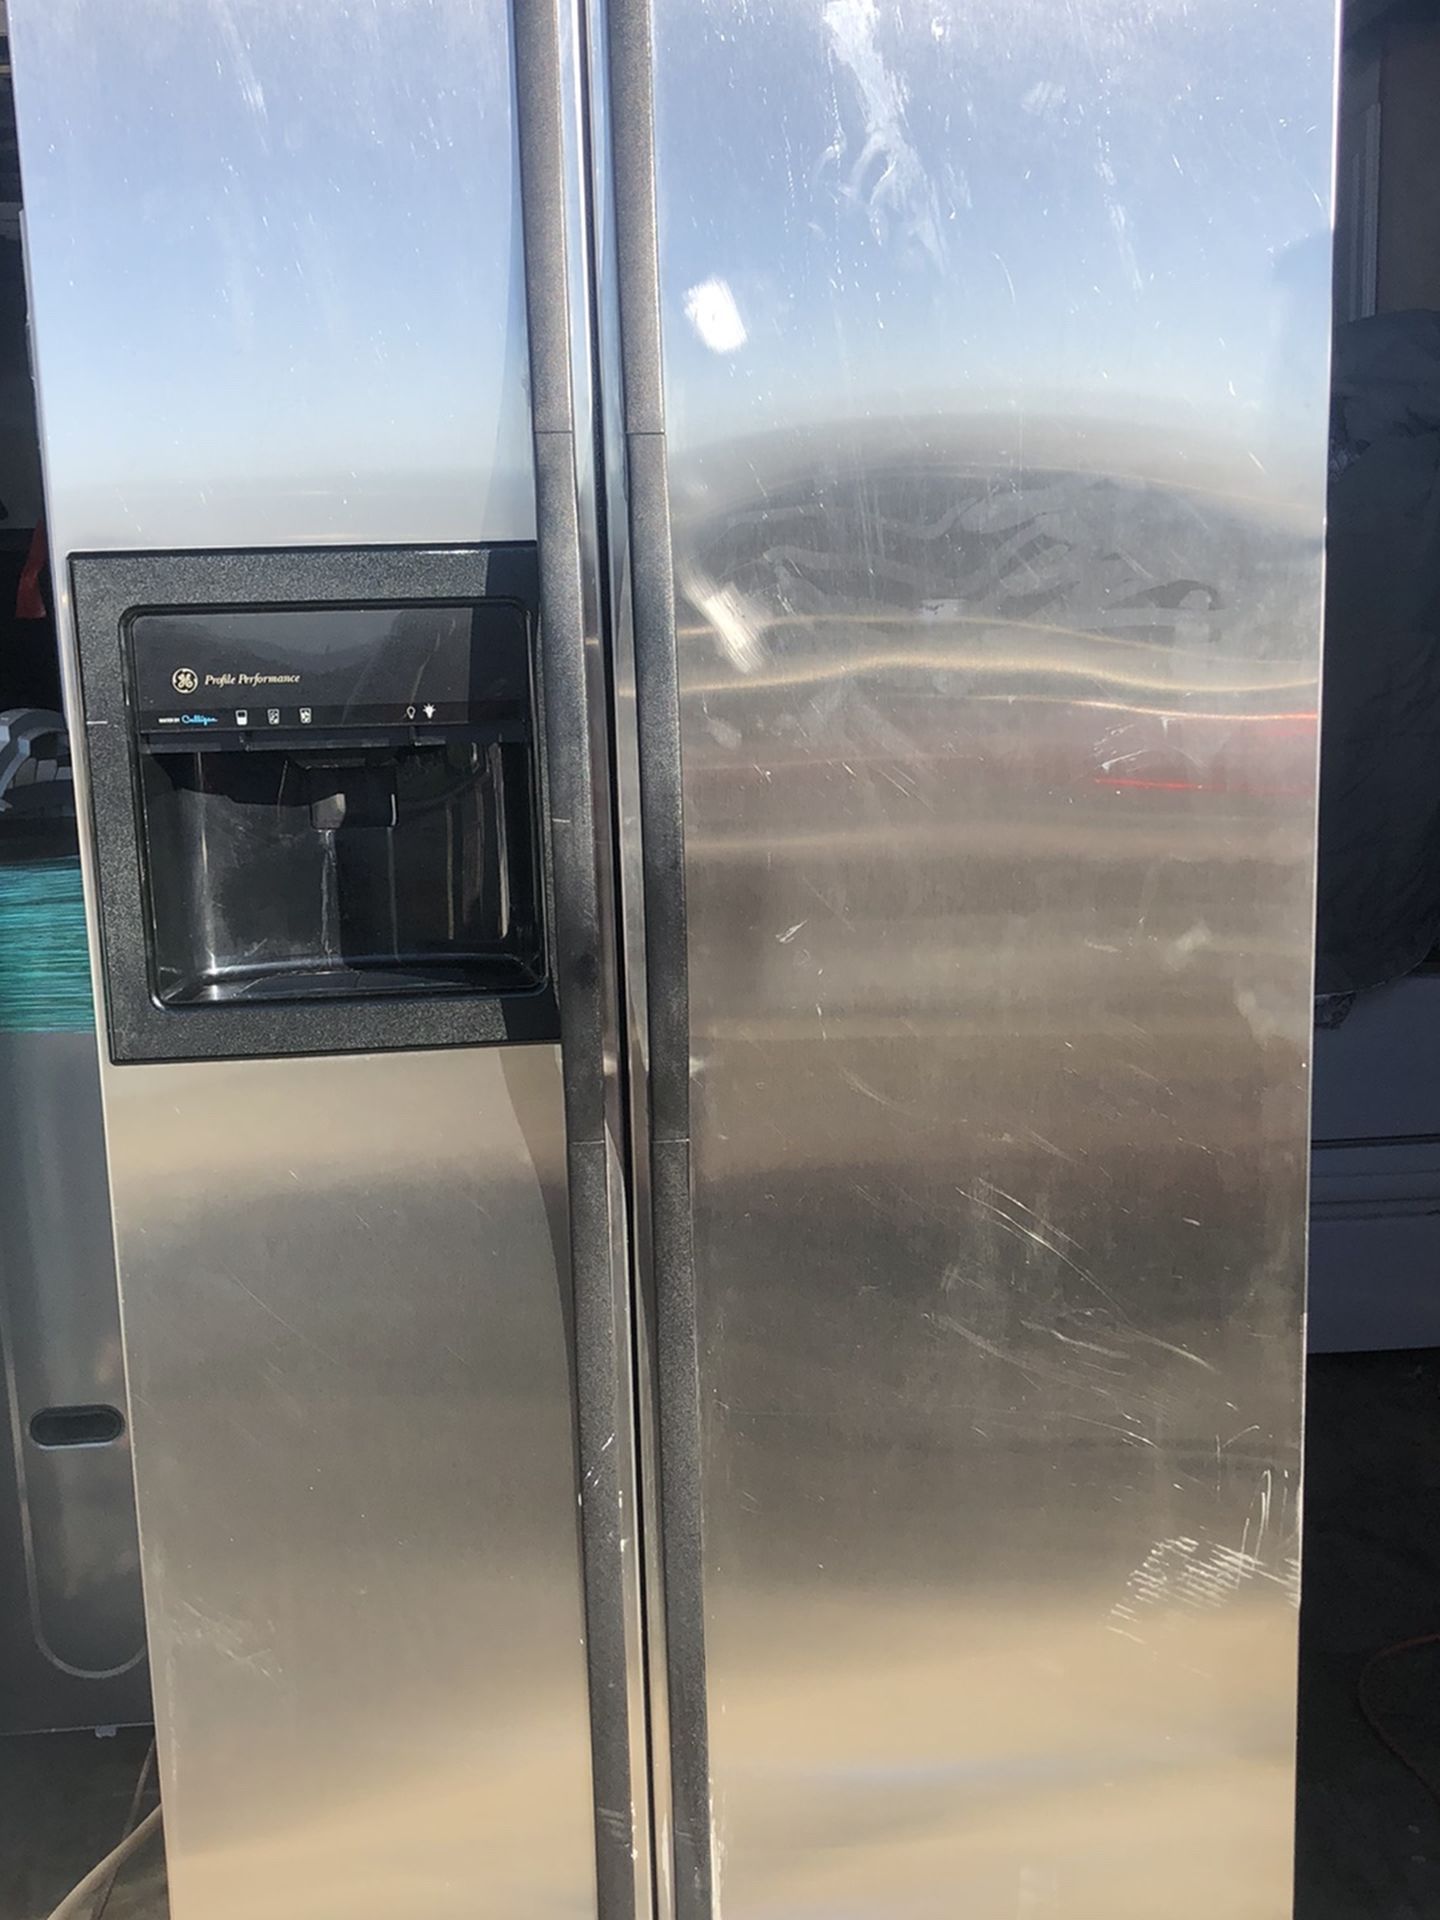 GE FRIDGE IN OERFECT WORKING CONDITIONS $250